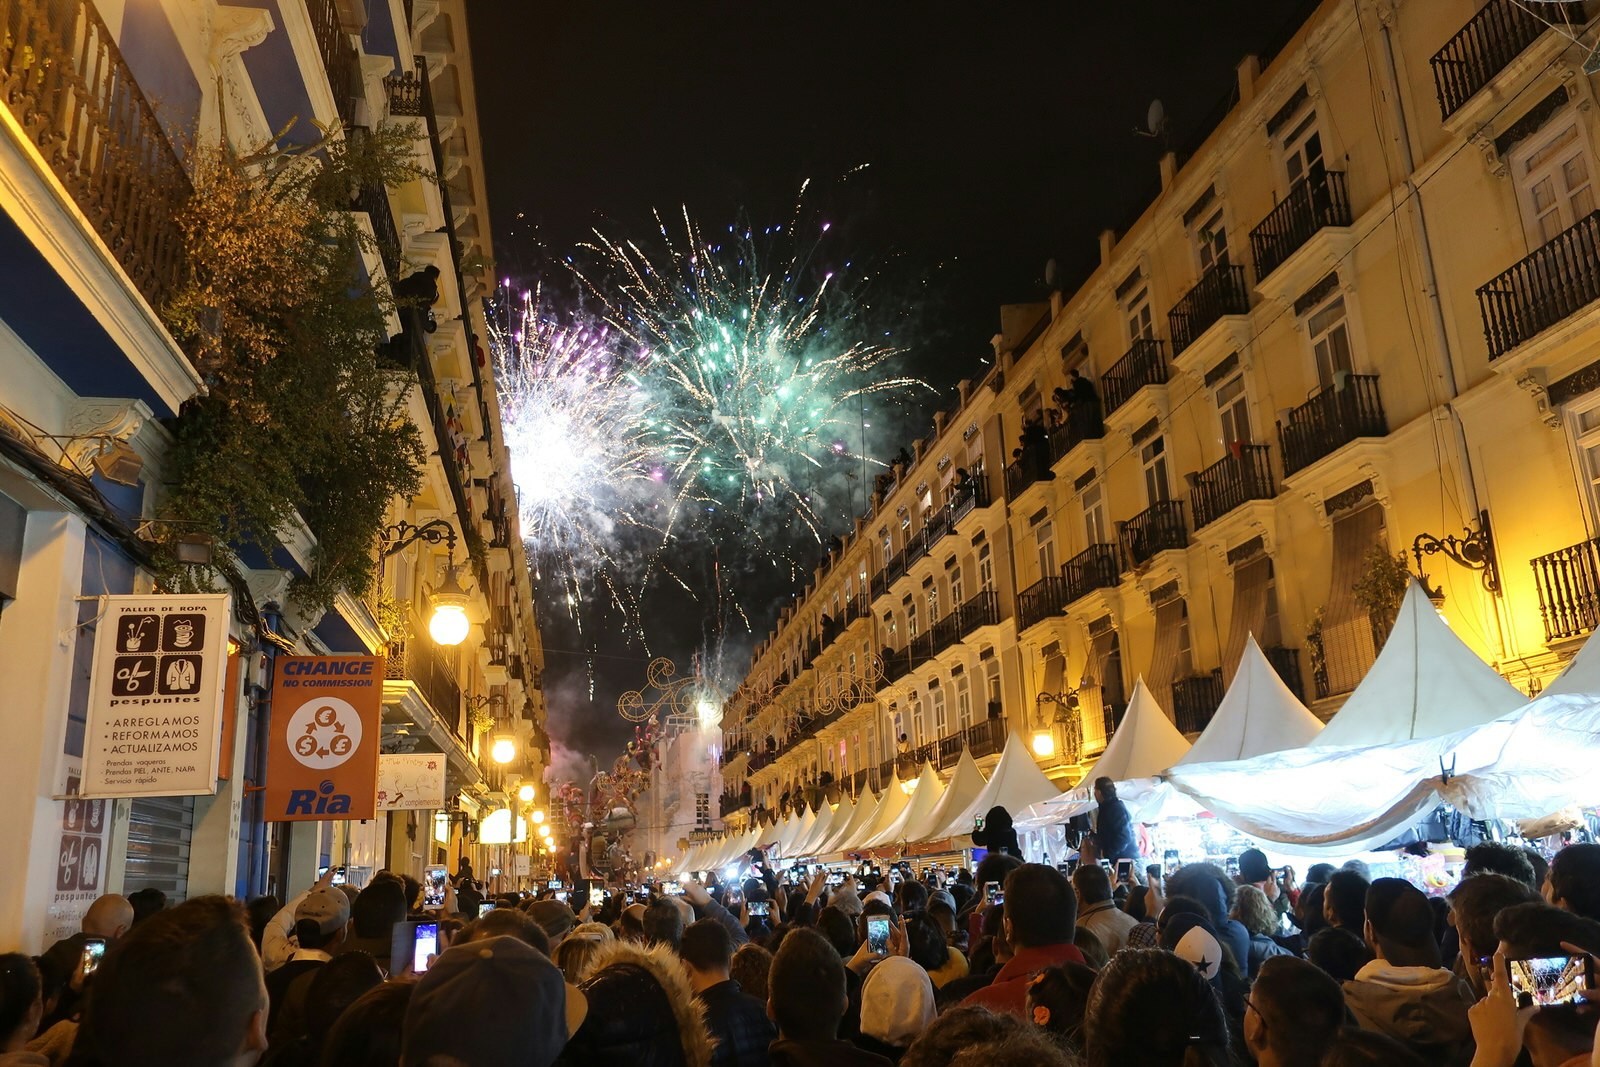 A crowd of people fill a street beneath tall buildings, while fireworks explode overhead.